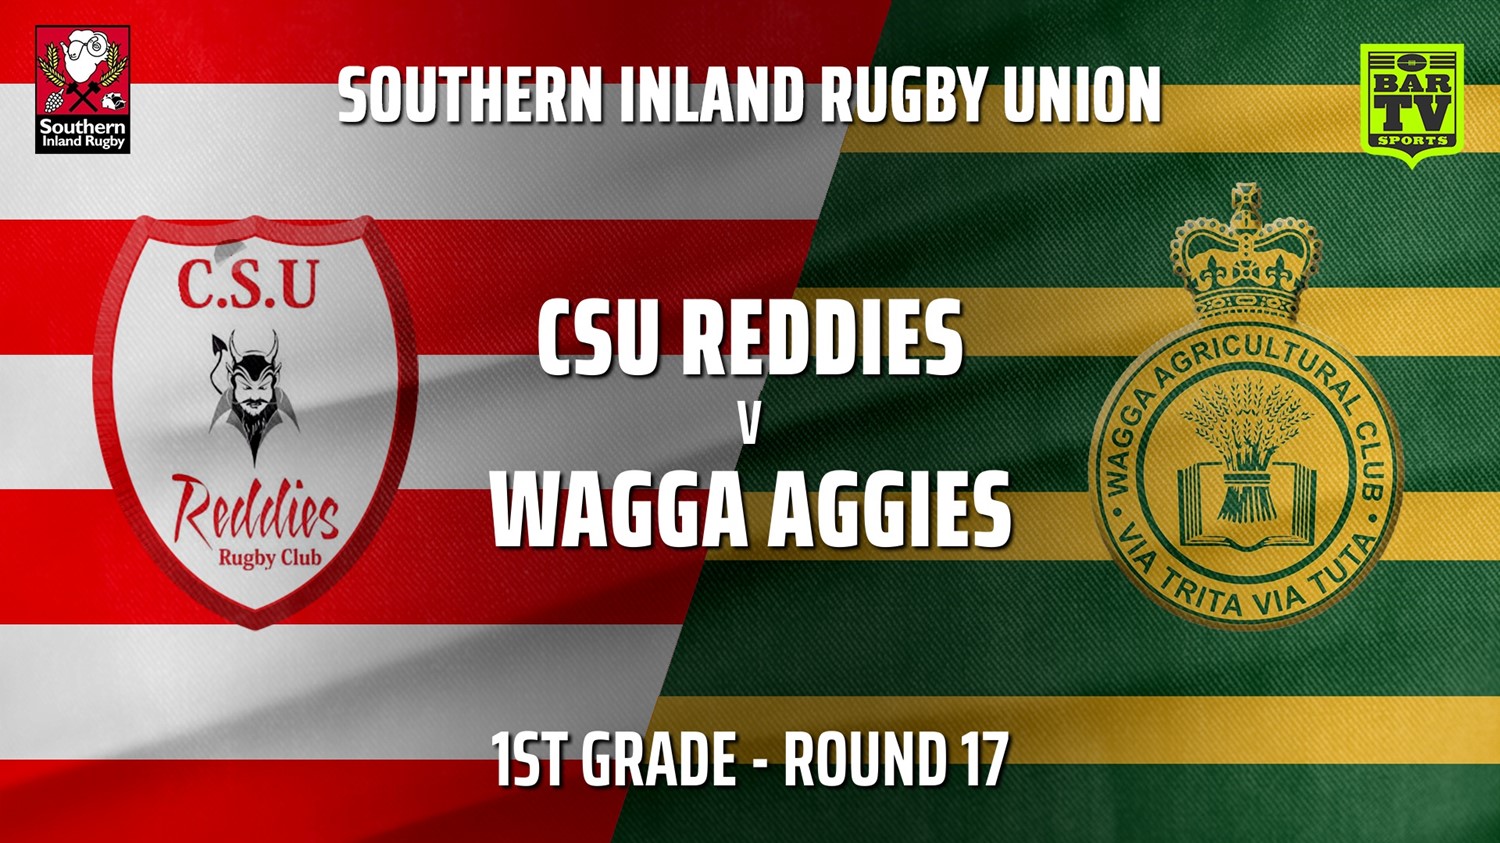 210807-Southern Inland Rugby Union Round 17 - 1st Grade - CSU Reddies v Wagga Agricultural College Slate Image